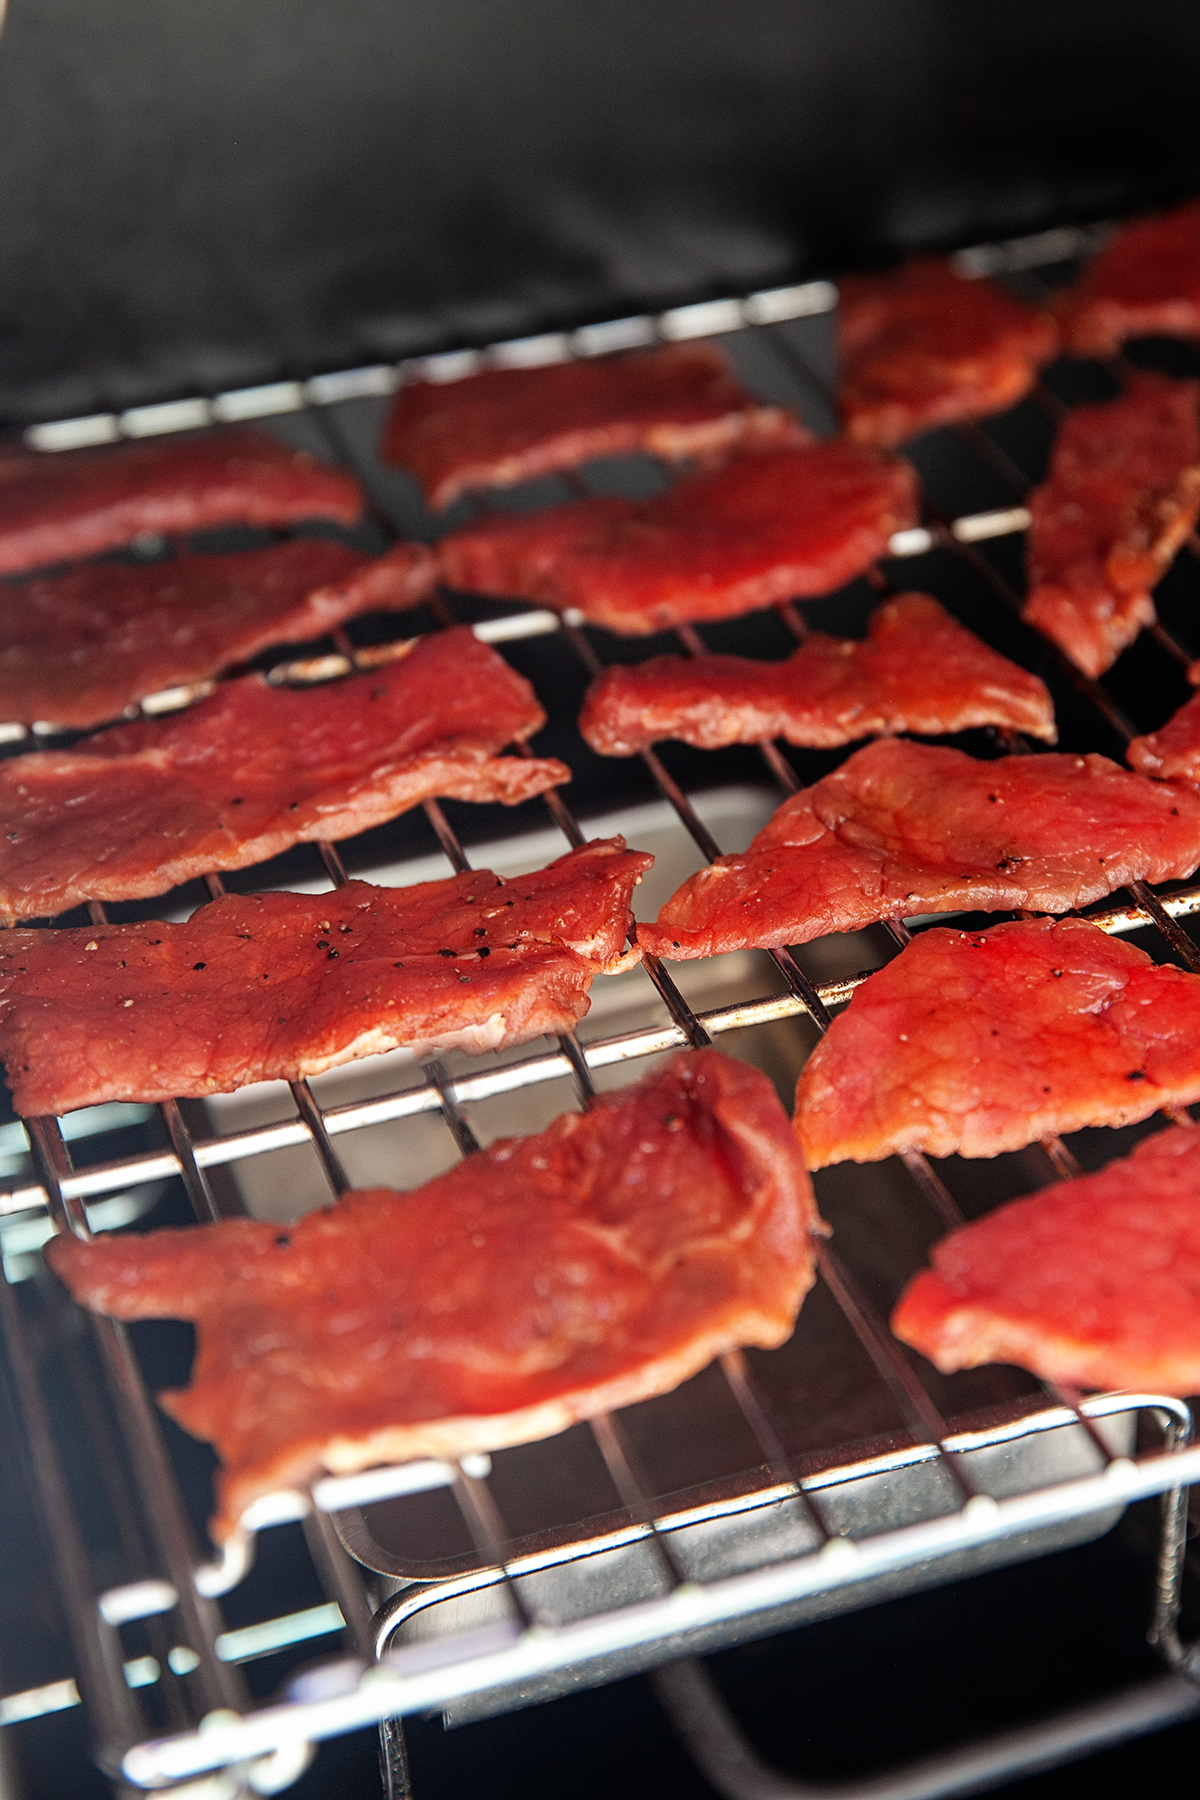 Coca-Cola marinated beef slices placed on a the racks of the smoker.